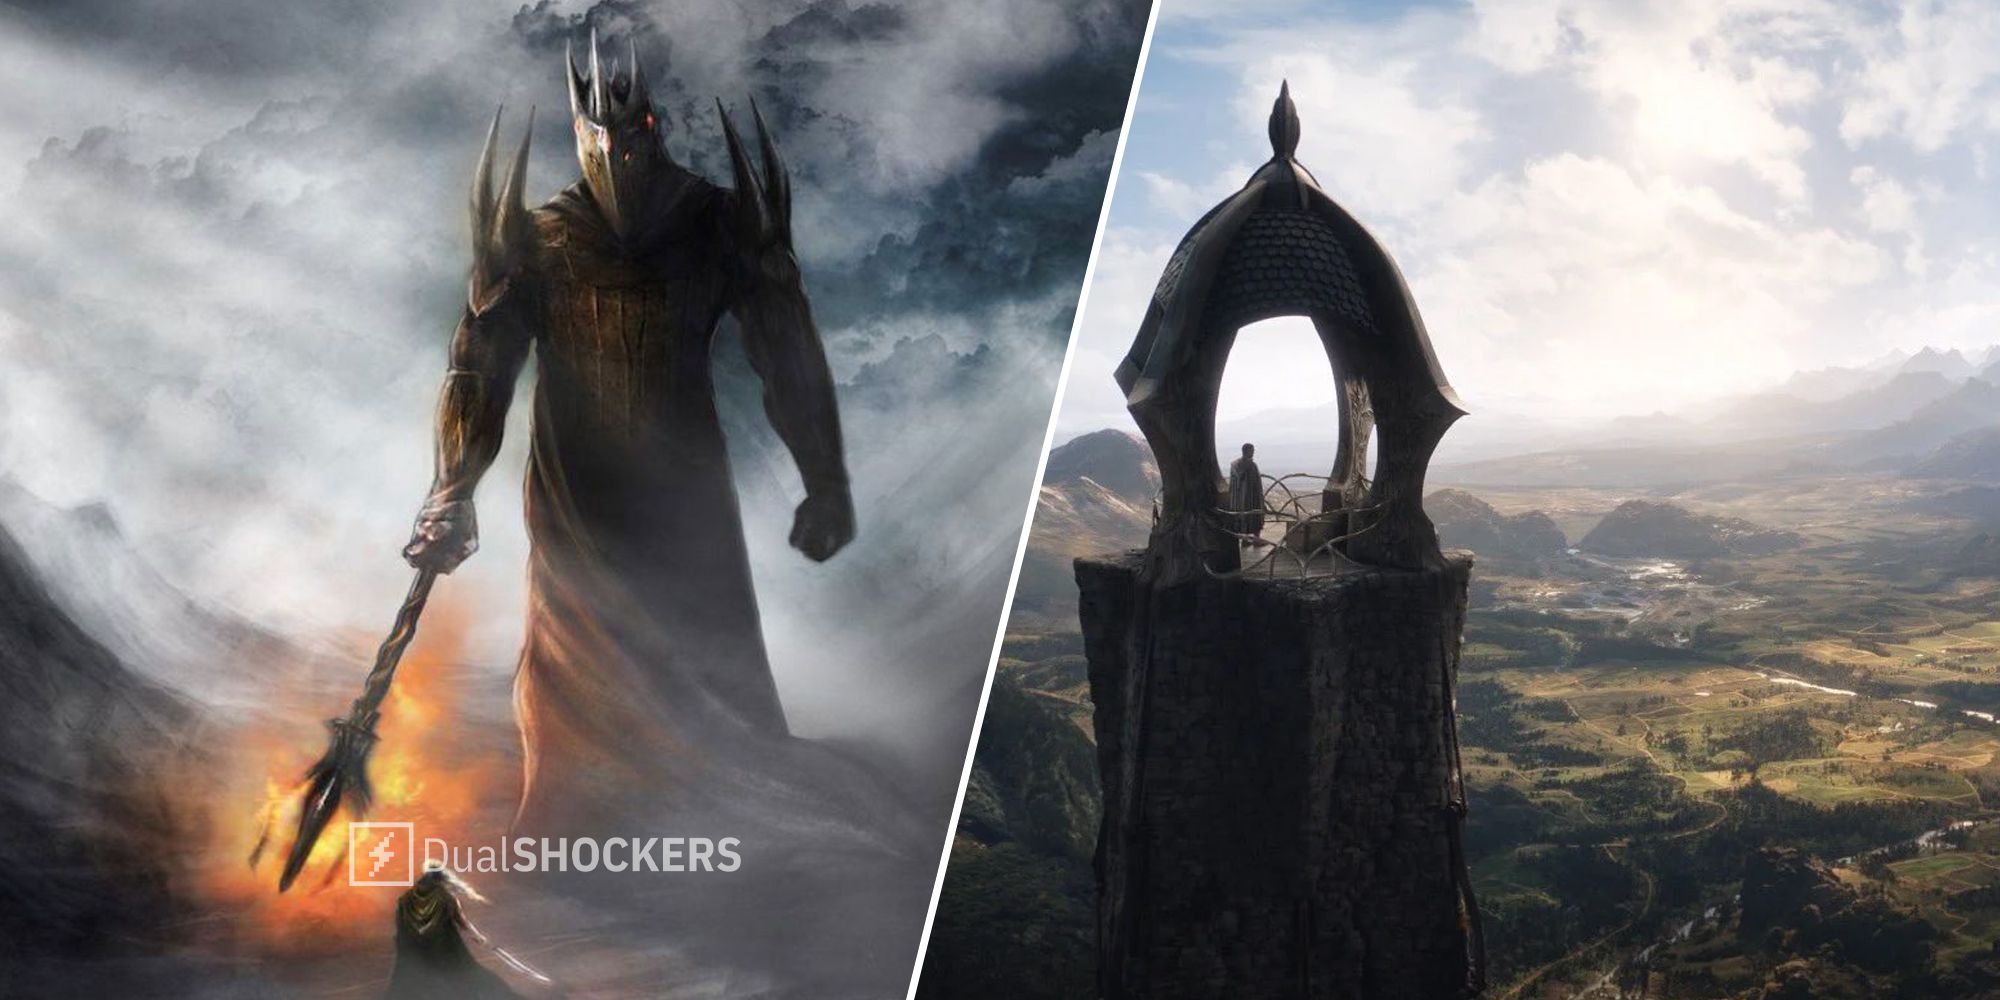 The Rings Of Power Morgoth?